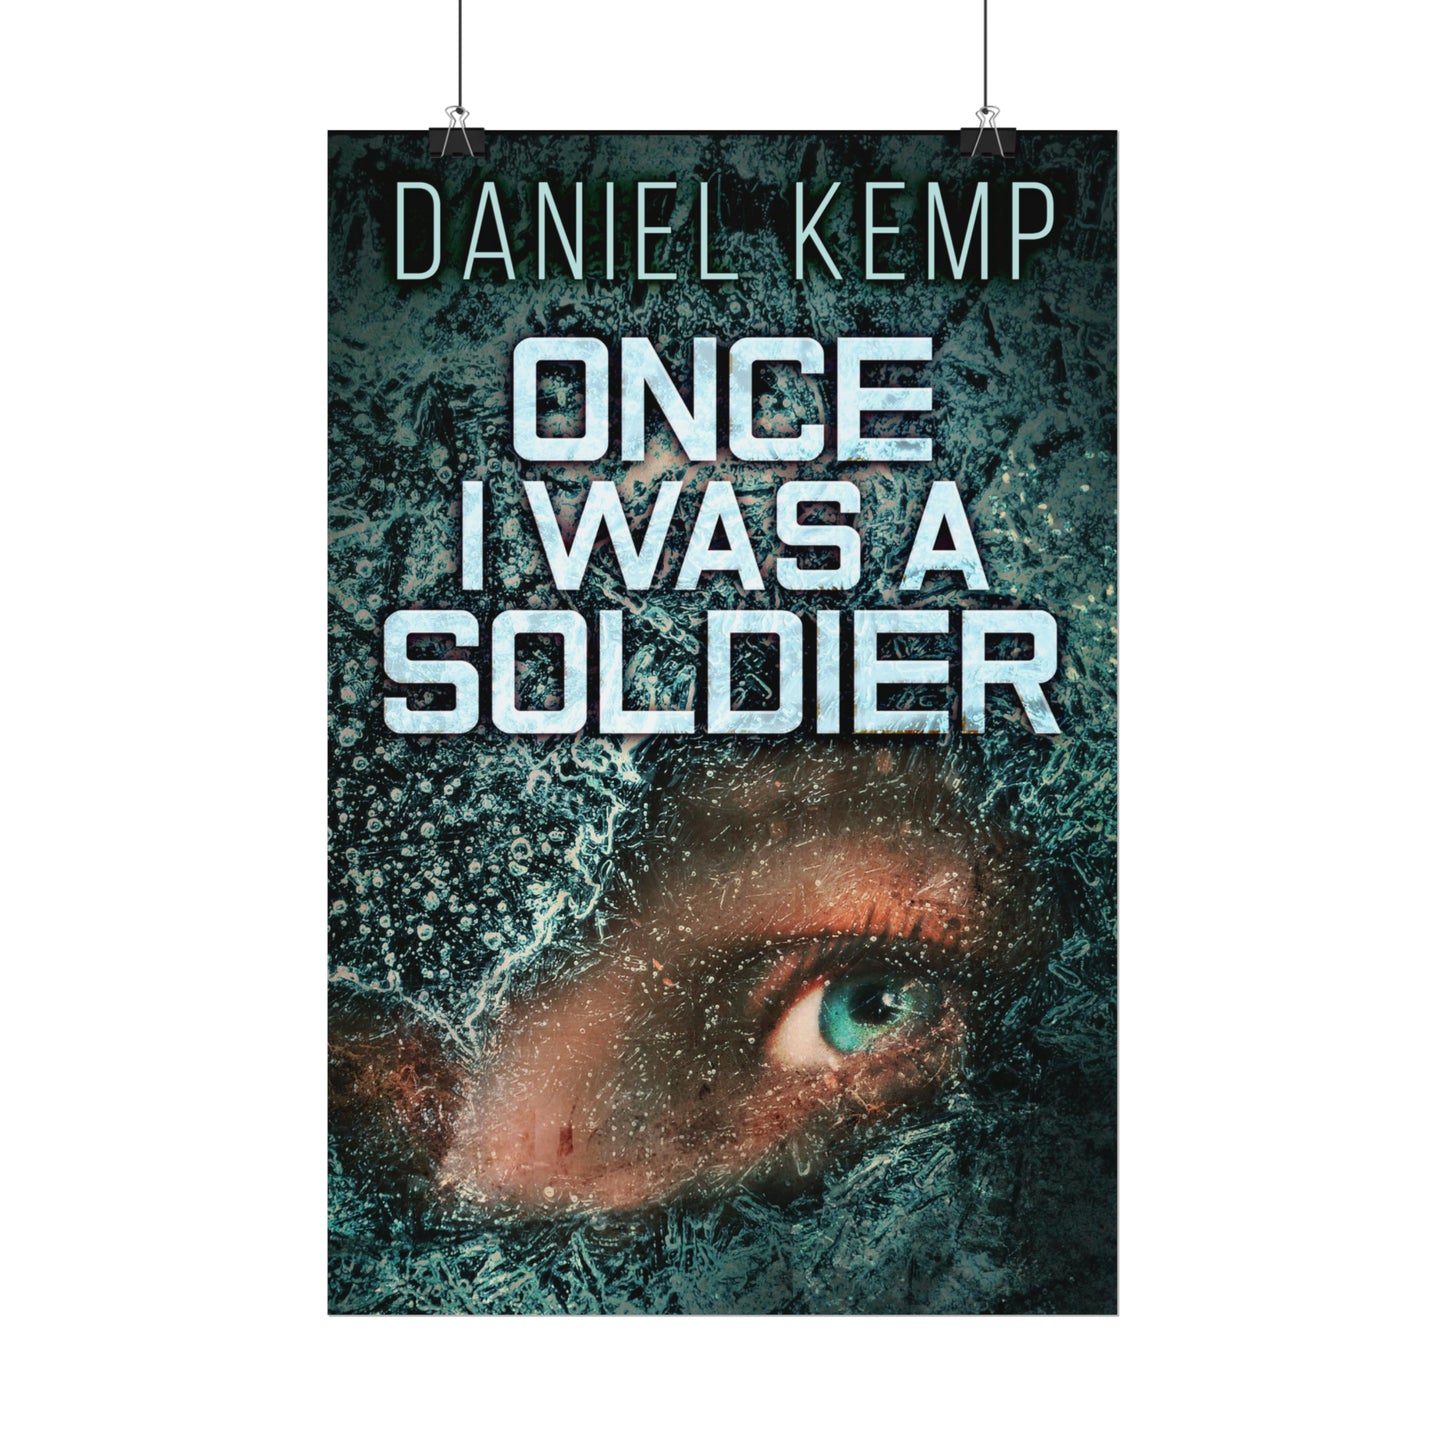 Once I Was A Soldier - Rolled Poster